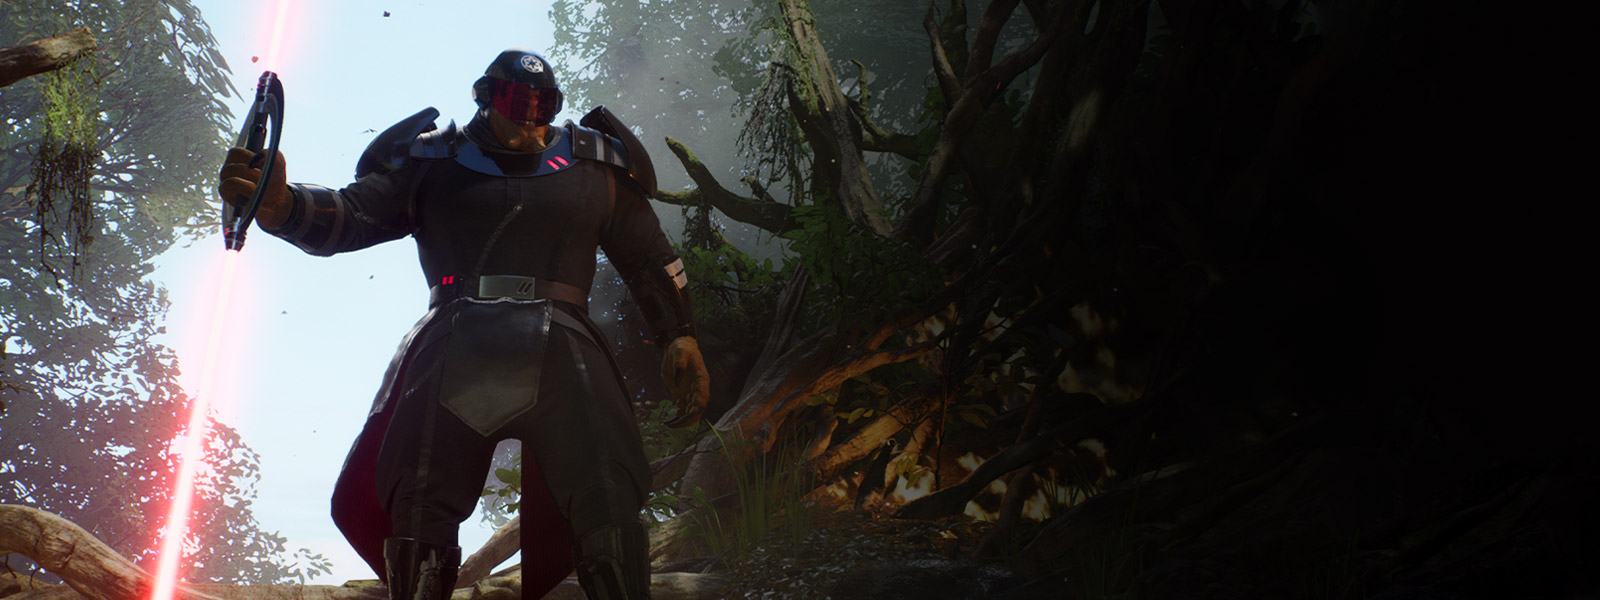 A large alien creature in Inquisitor armor holds a dual-sided lightsaber in a jungle